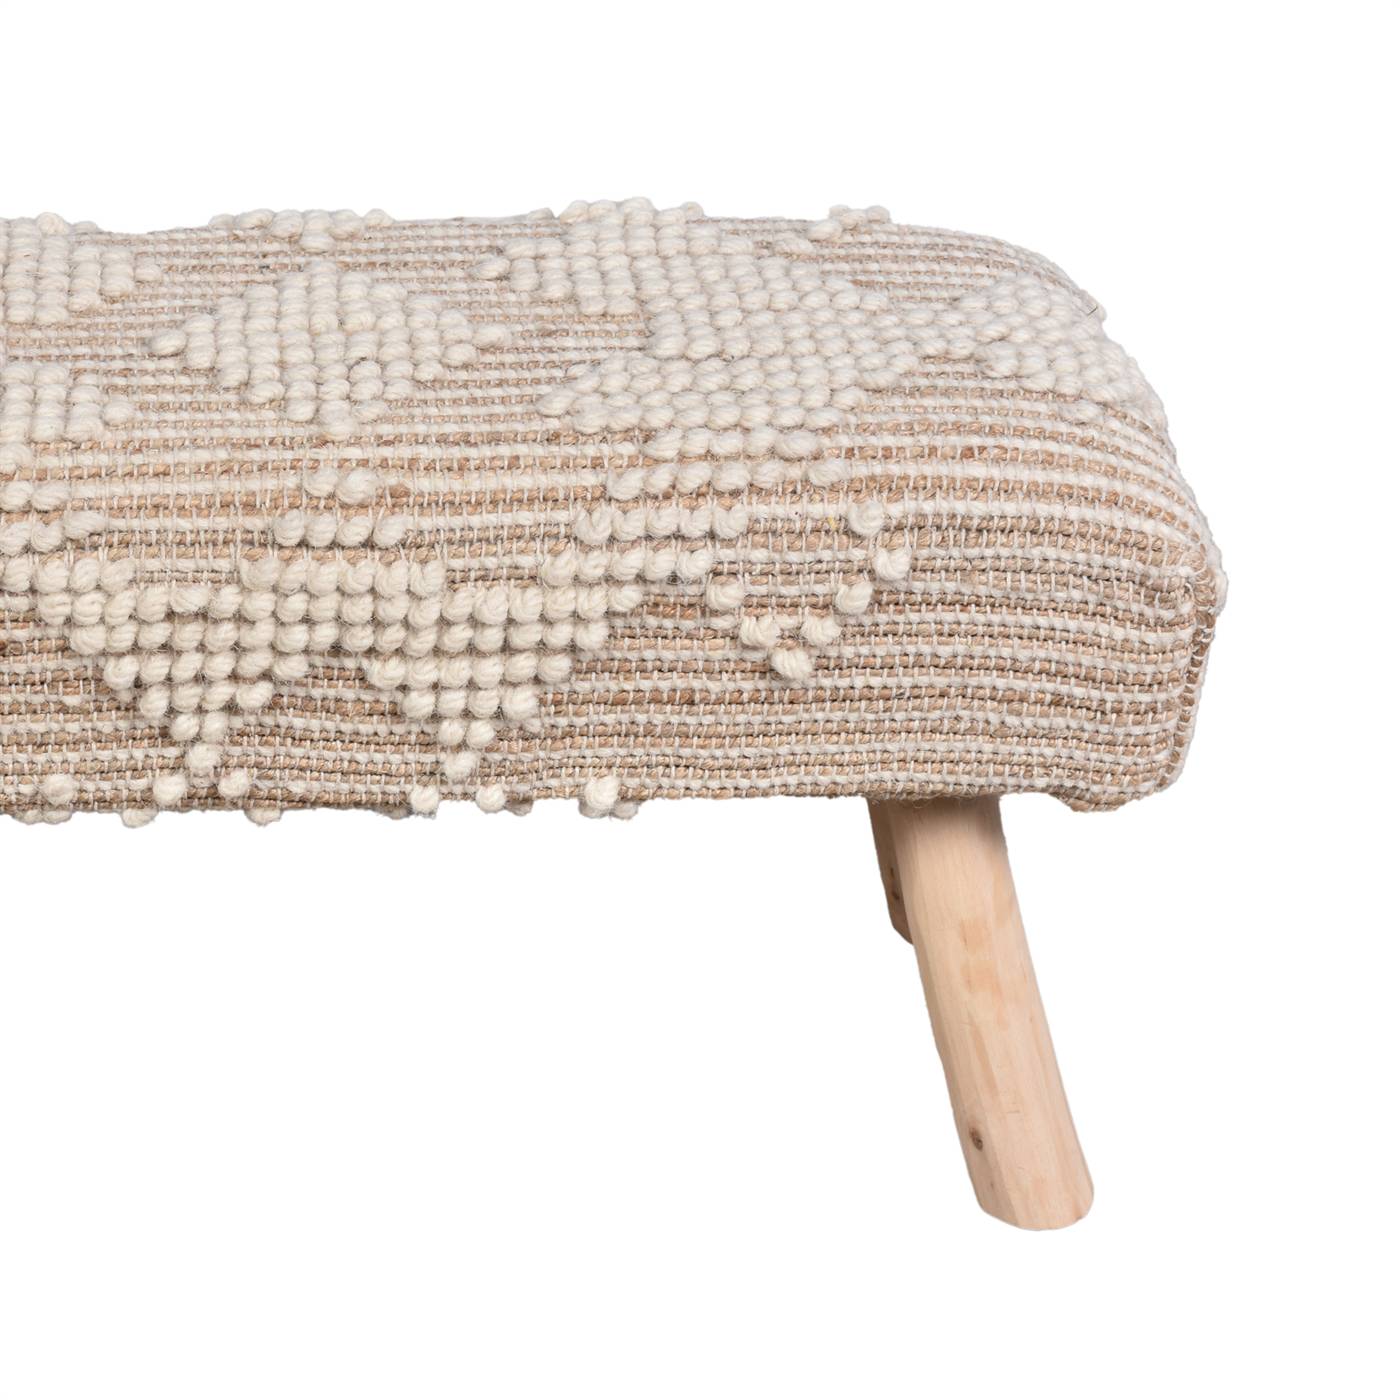 Wedge Bench, 80x30x40 cm, Natural, Natural White, Jute, Wool, Hand Woven, Pitloom, All Loop